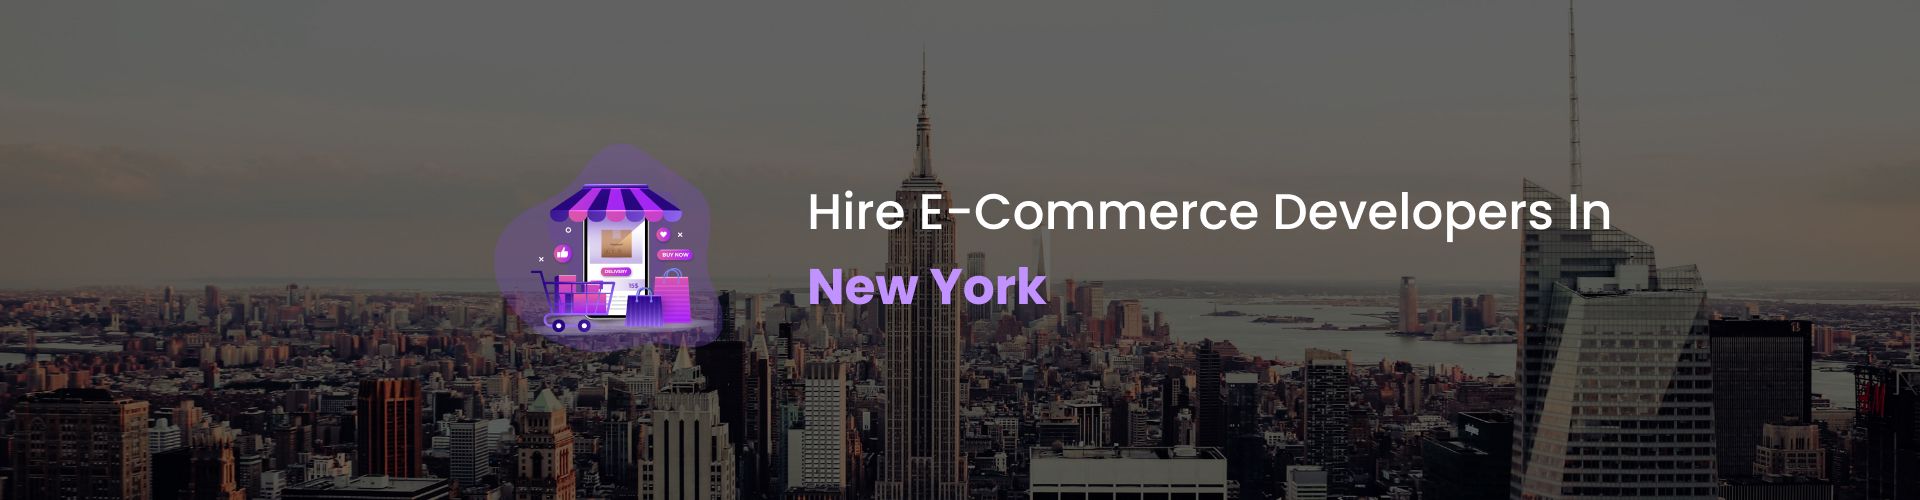 hire ecommerce developers in new york